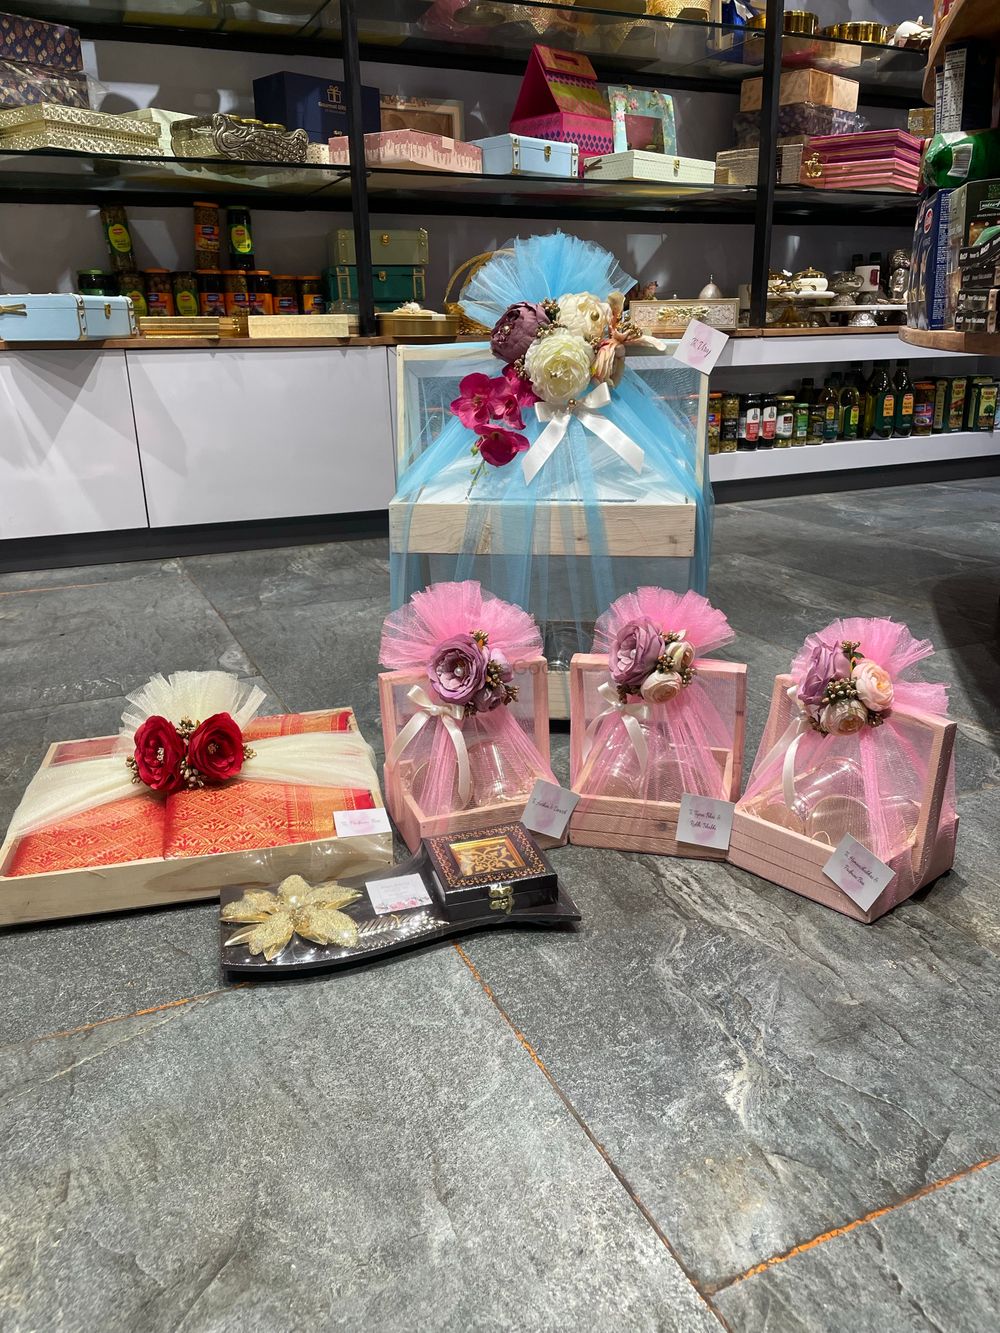 Photo By Siddhi Luxury Hampers - Favors